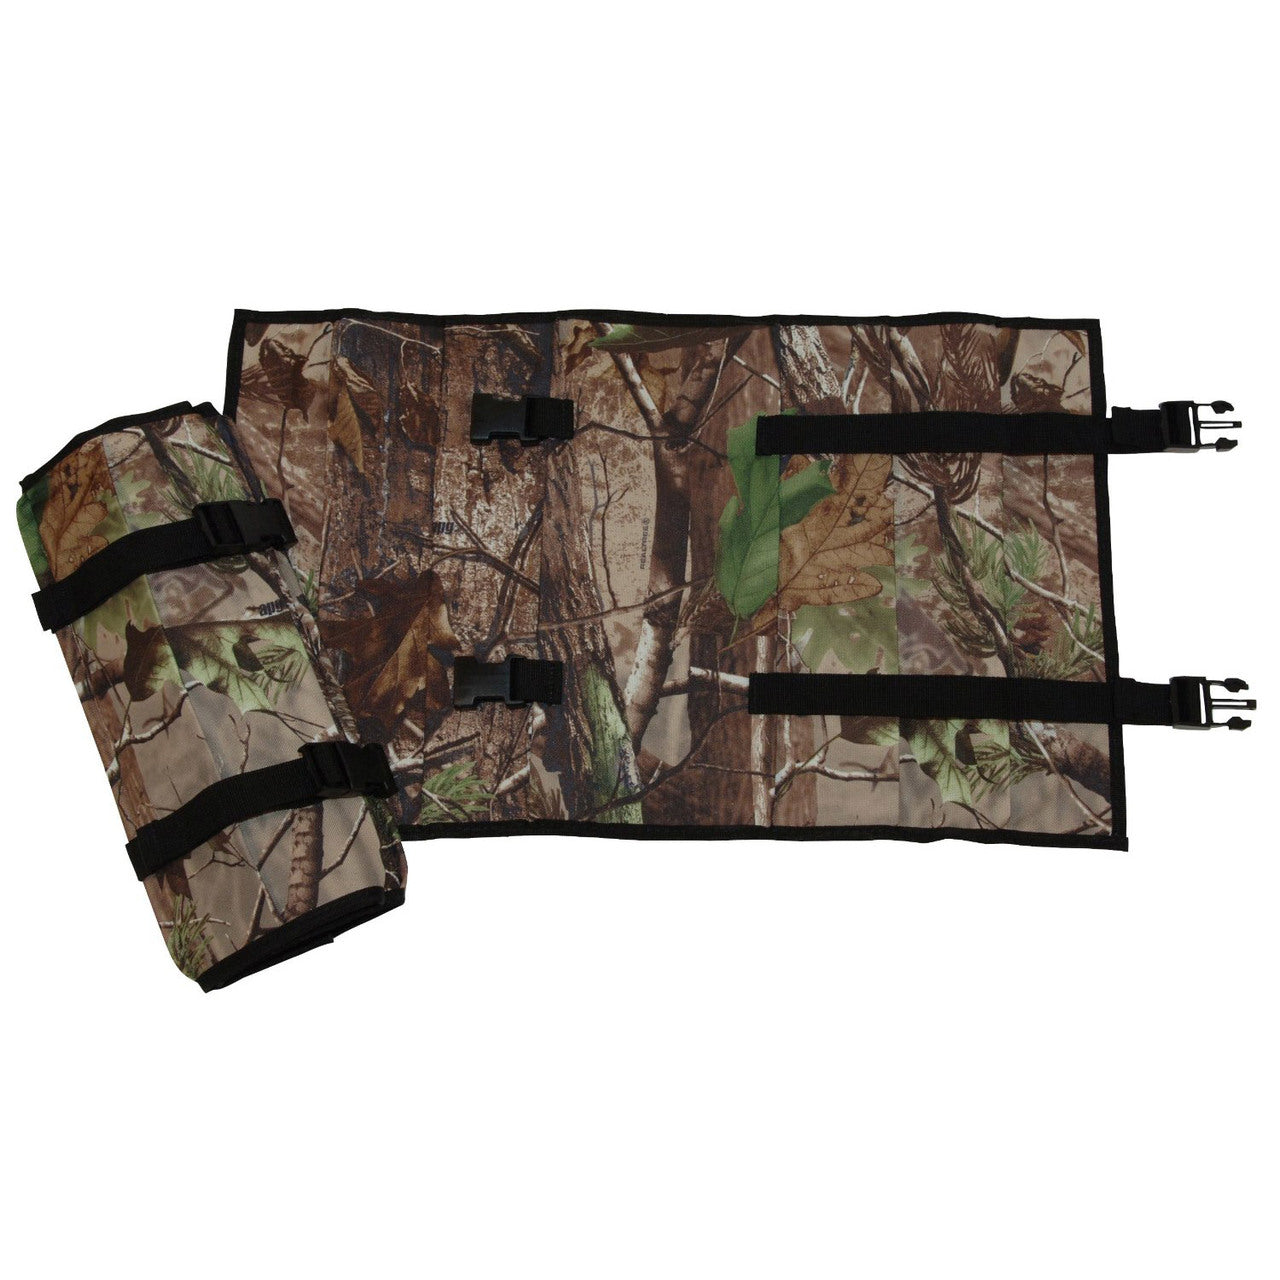 Rattlers Brand Scaletech Snake Protection Gaiters, 9020